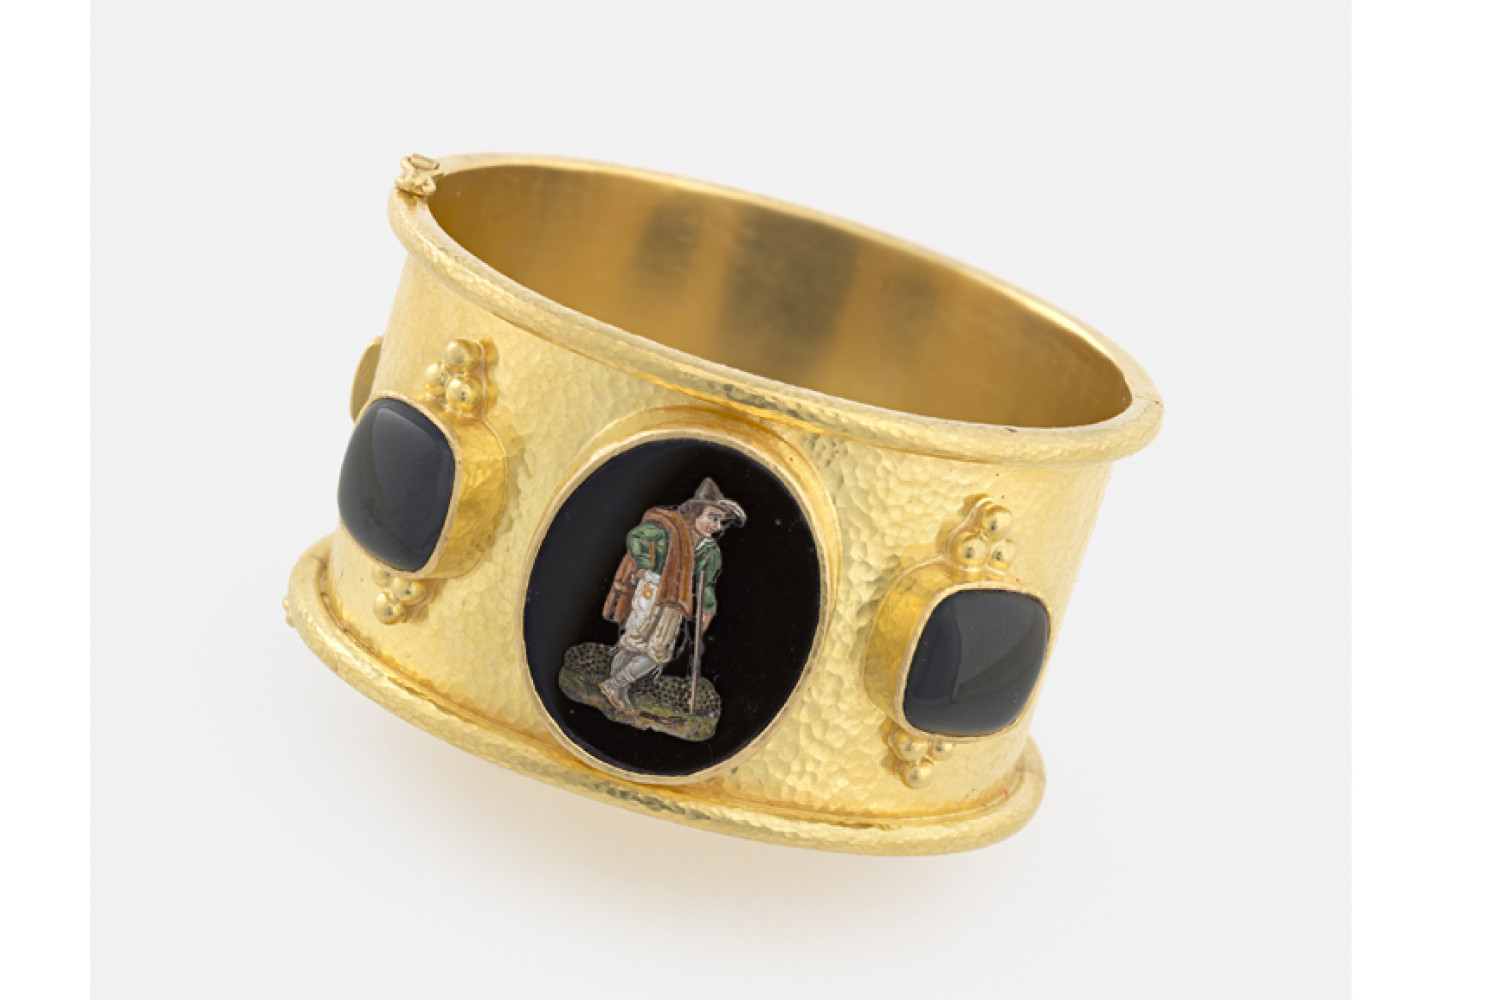 Peasant Man with Walking Stick, Rome, 19th century, after etchings by Bartolomeo Pinelli (Italian, 1781—1835); Micromosaic set in wide hammered gold bangle with rolled edges and side black jade cushions with gold triads, 1 3/8 x 2 1/2 x 2 3/8 in. Collection of Elizabeth Locke; Photo: Travis Fullerton; © Virginia Museum of Fine Arts

